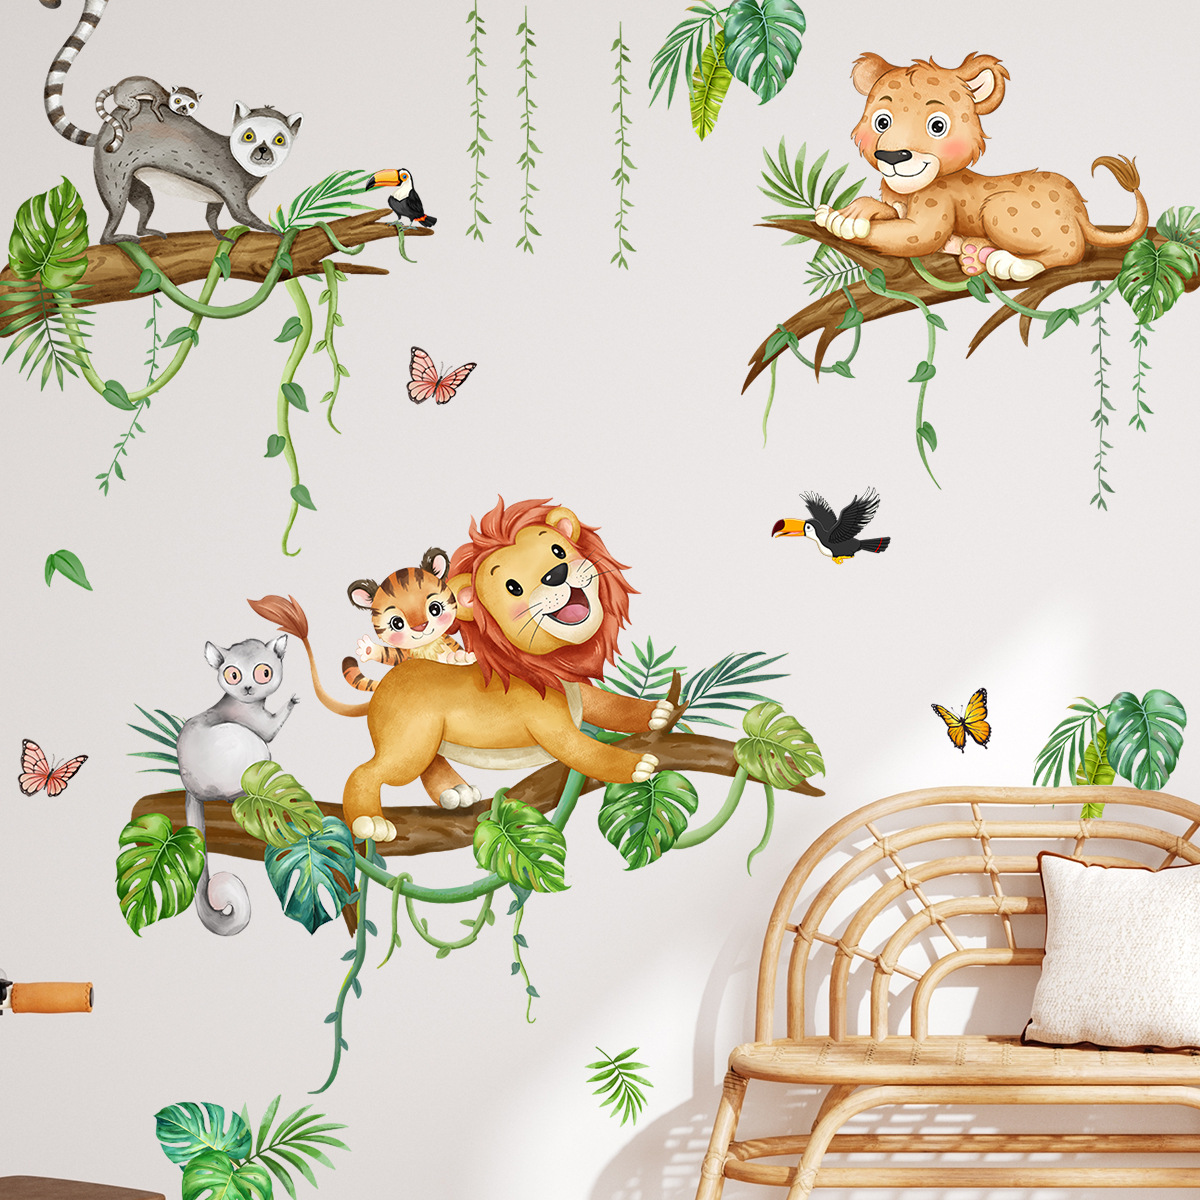 Animal Wall stickers Jungle Wall stickers Wall Decal Printing